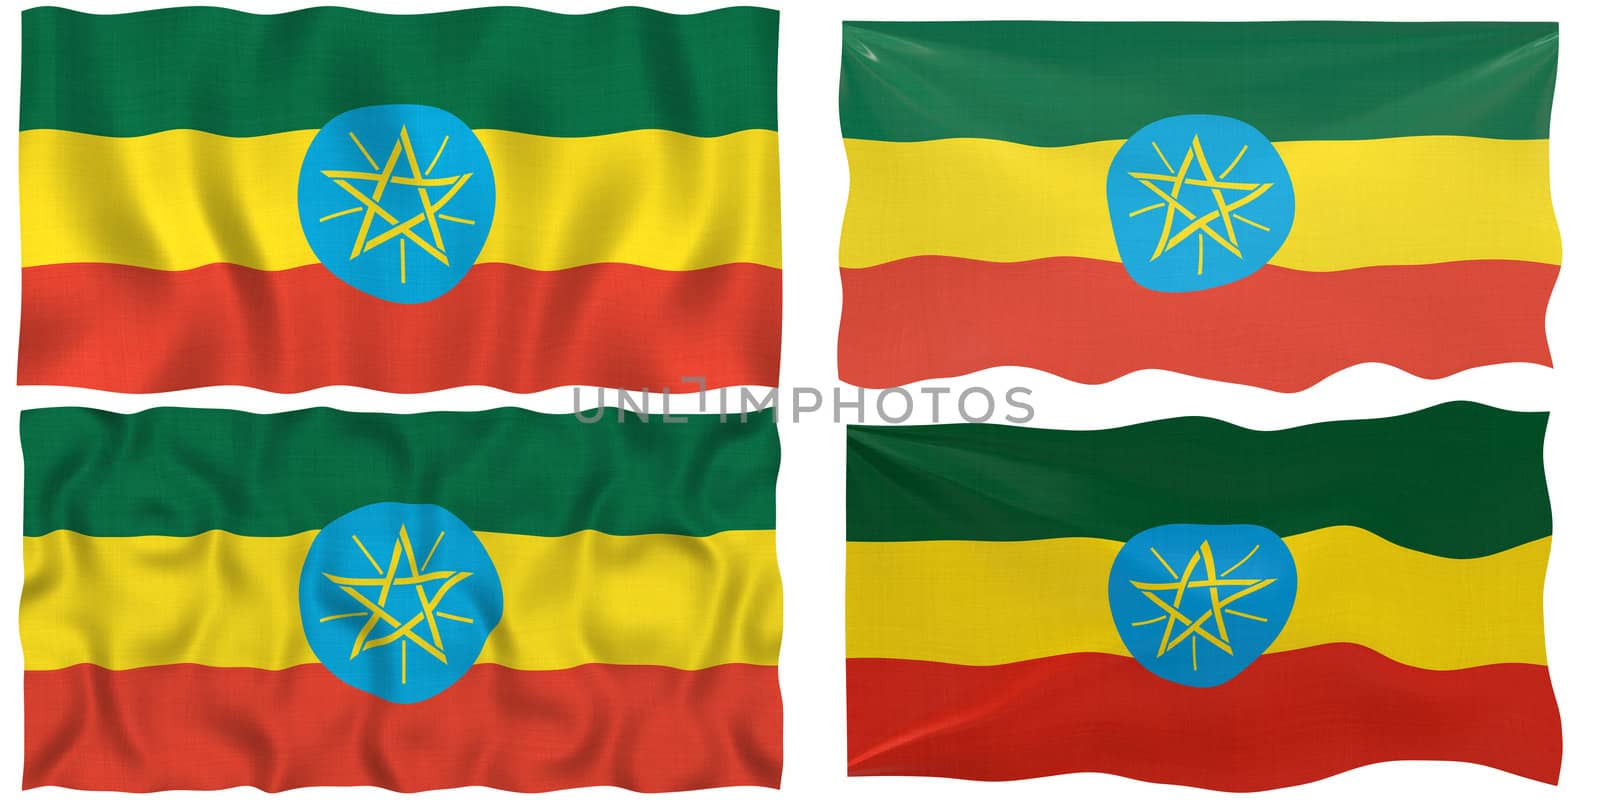 Great Image of the Flag of Ethopia